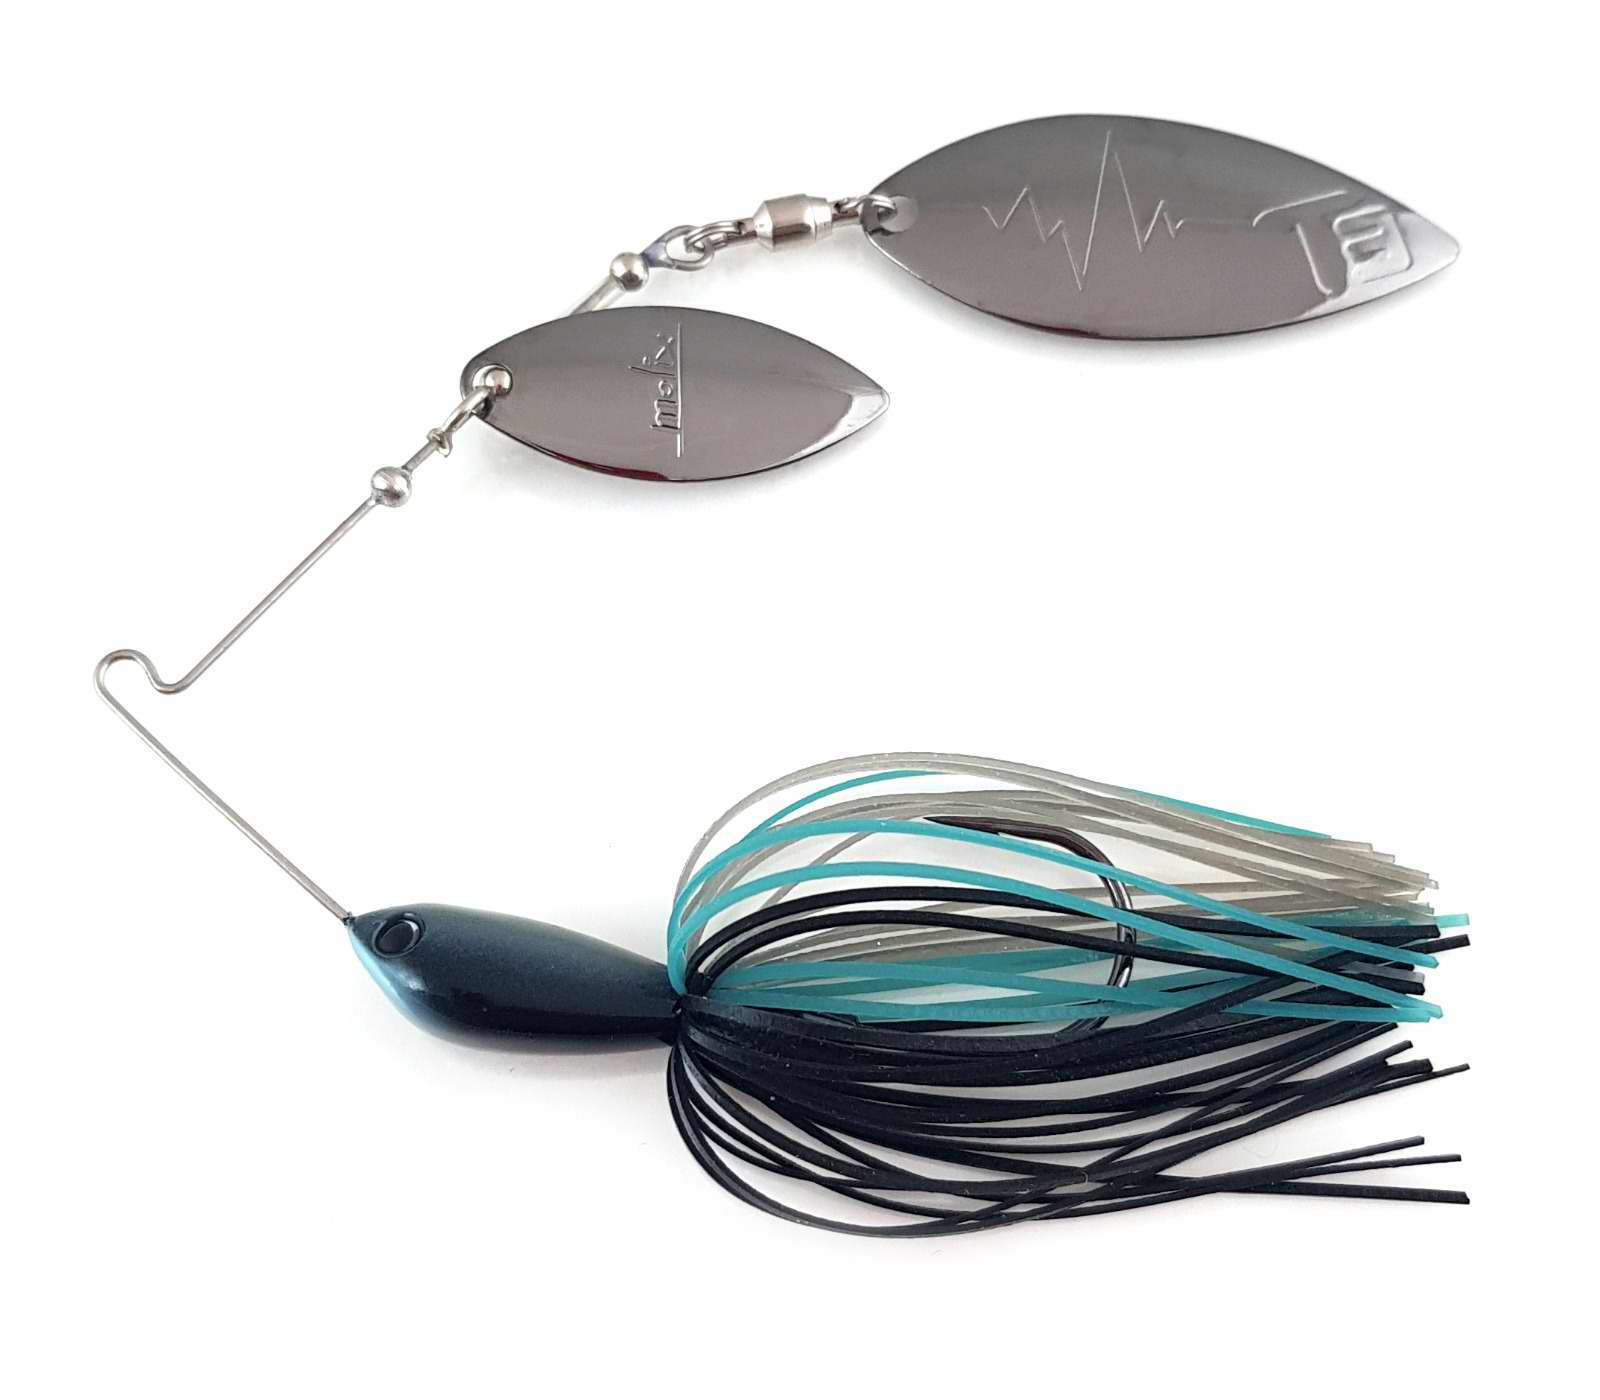 OUT/OUT_ARTICOLI/areapesca.it_AP01301.3916.3915_t3-custom-spinnerbait-38-oz---10-gr-s06---space-shad.jpg